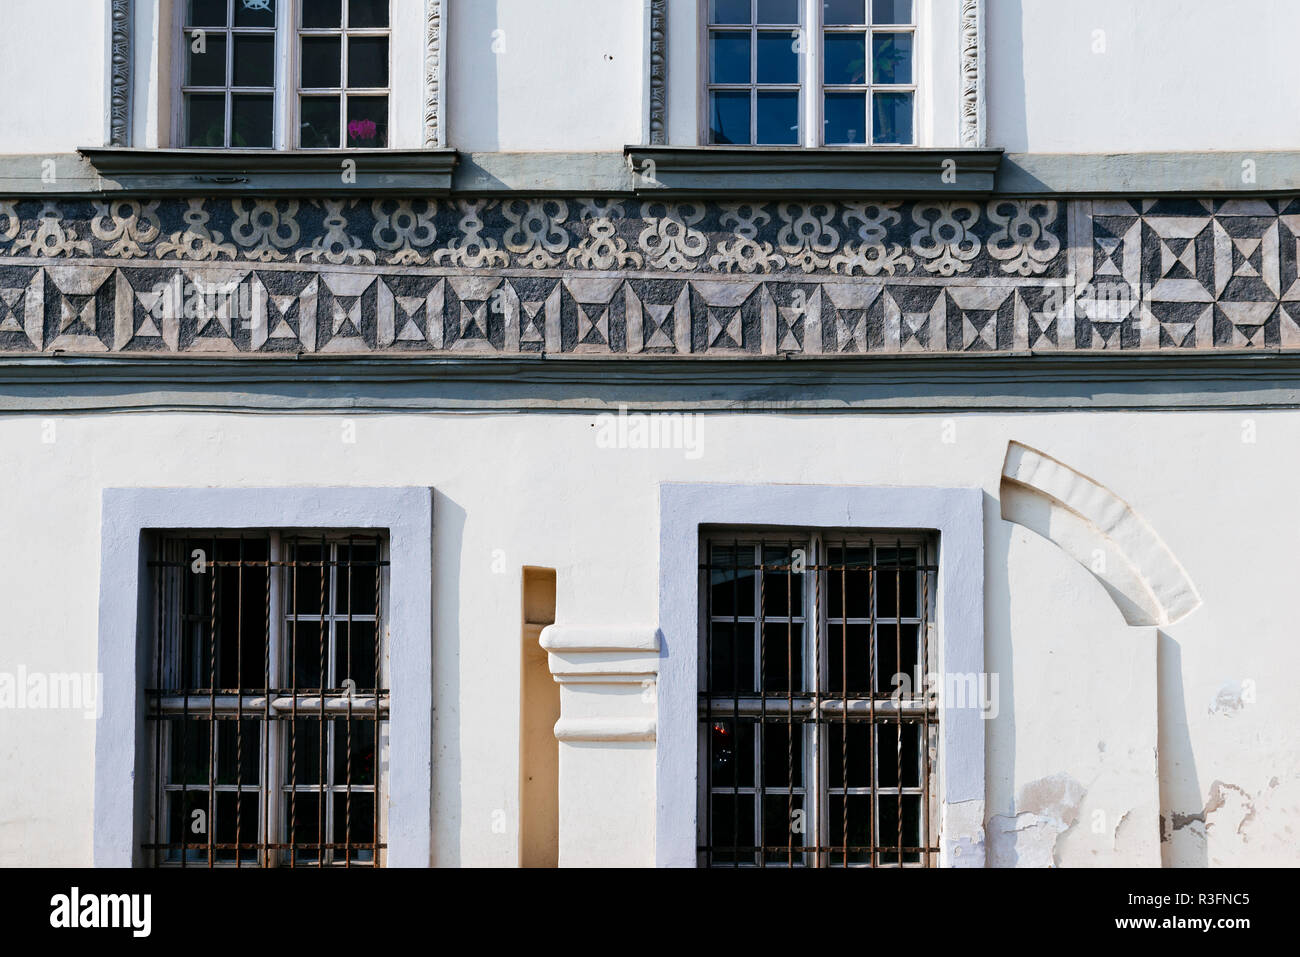 Architectural details in a building on Vilniaus g, street. Vilnius, Vilnius County, Lithuania, Baltic states, Europe. Stock Photo